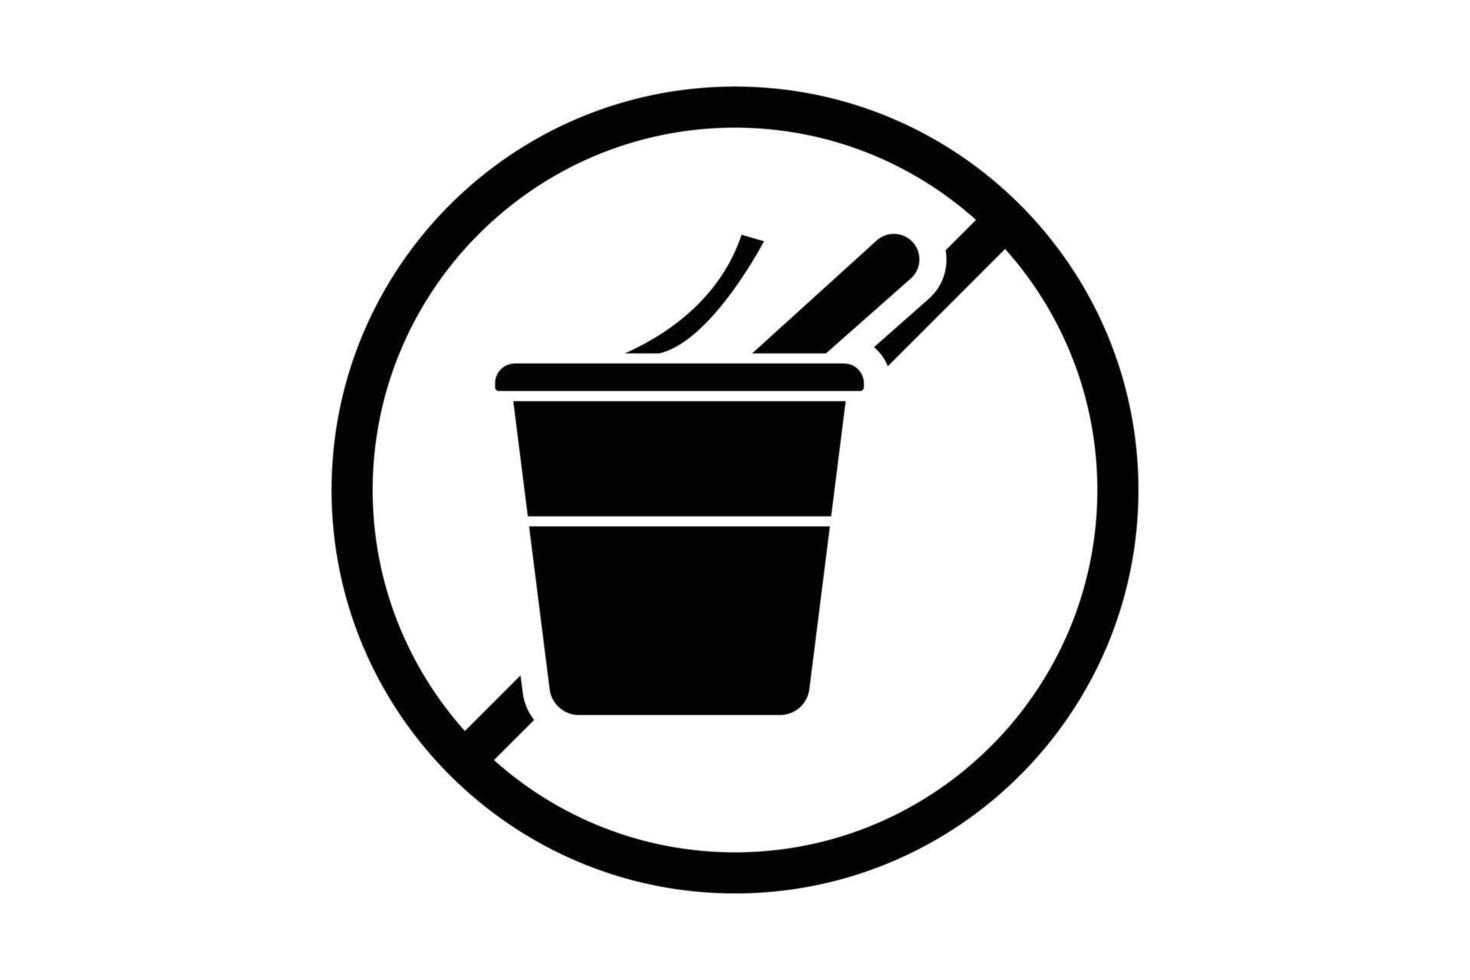 Yogurt free icon. icon related to food allergen. Solid icon style. Simple vector design editable